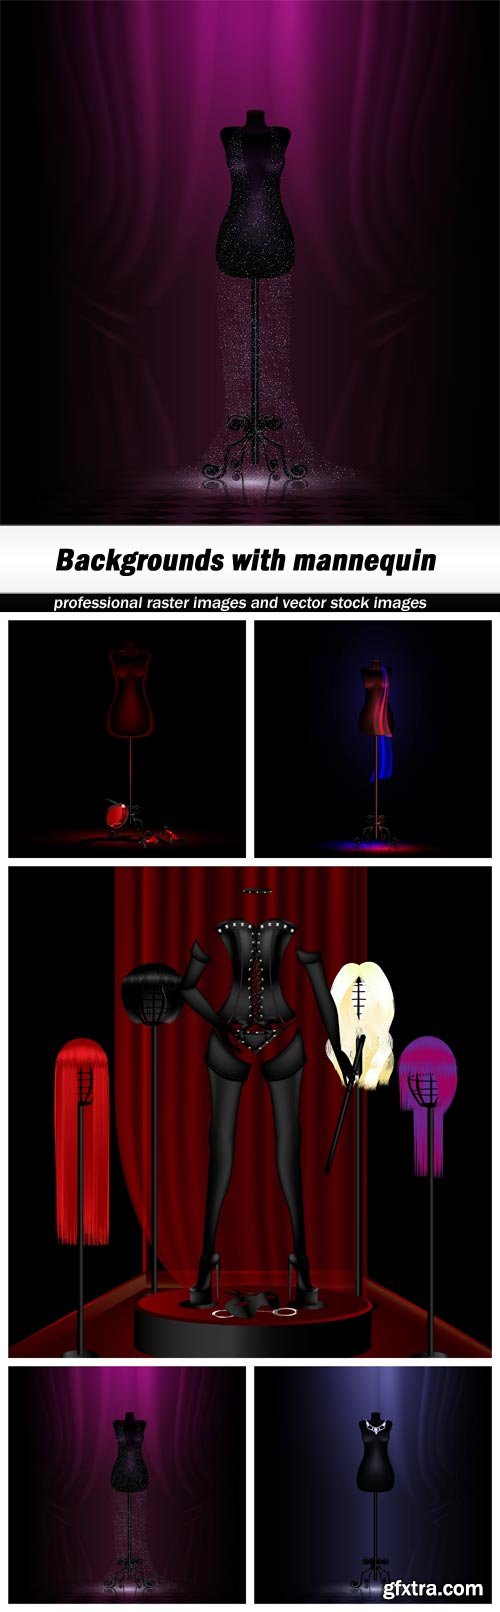 Backgrounds with mannequin - 5 EPS